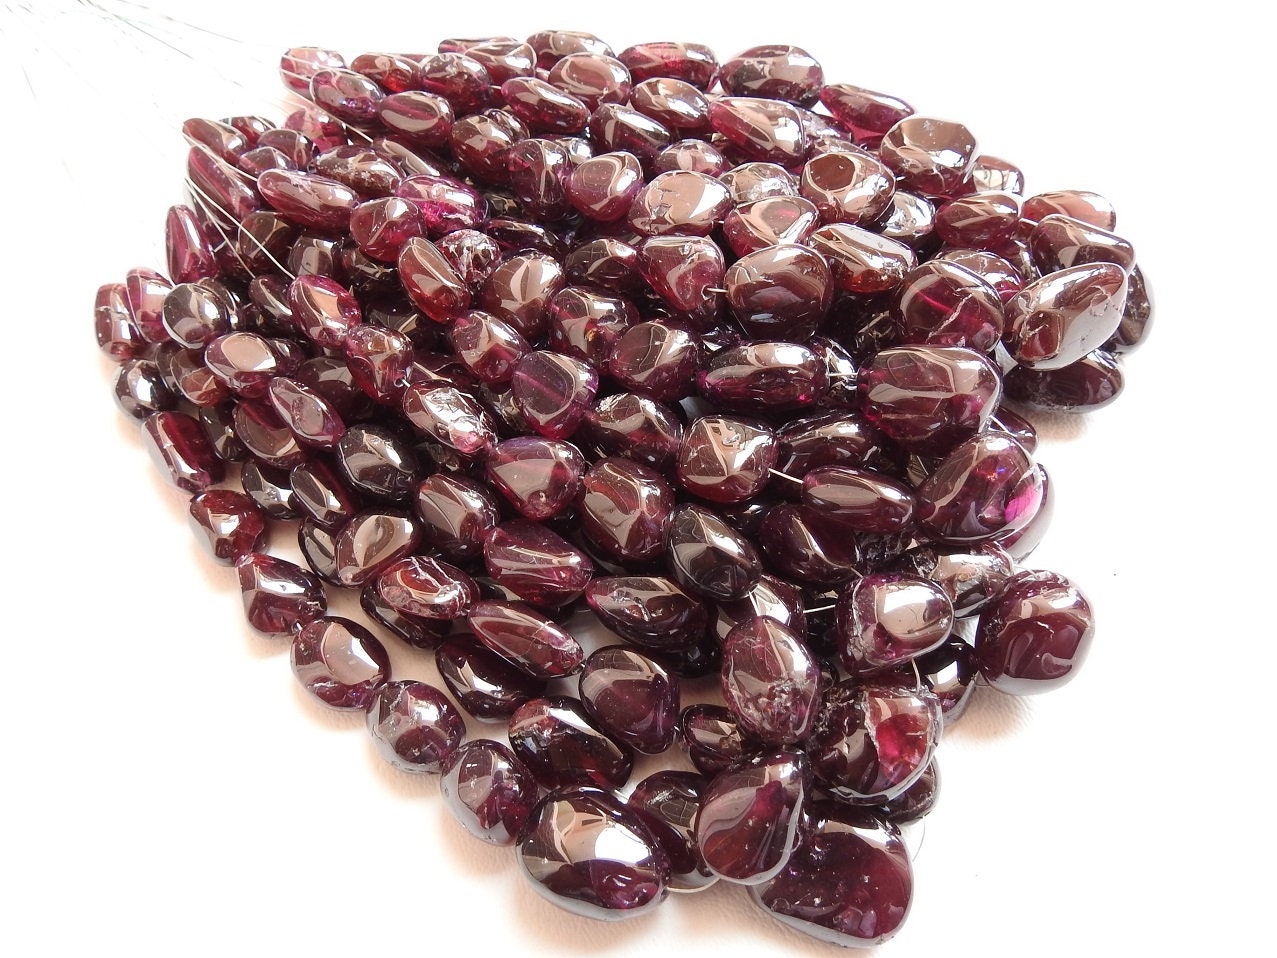 Natural Rhodolite Garnet Tumble,Smooth,Nuggets,Loose Bead,Handmade,For Making Jewelry,Wholesaler,12Inch 16X14To12X9MM Approx,PME-TU2 | Save 33% - Rajasthan Living 22